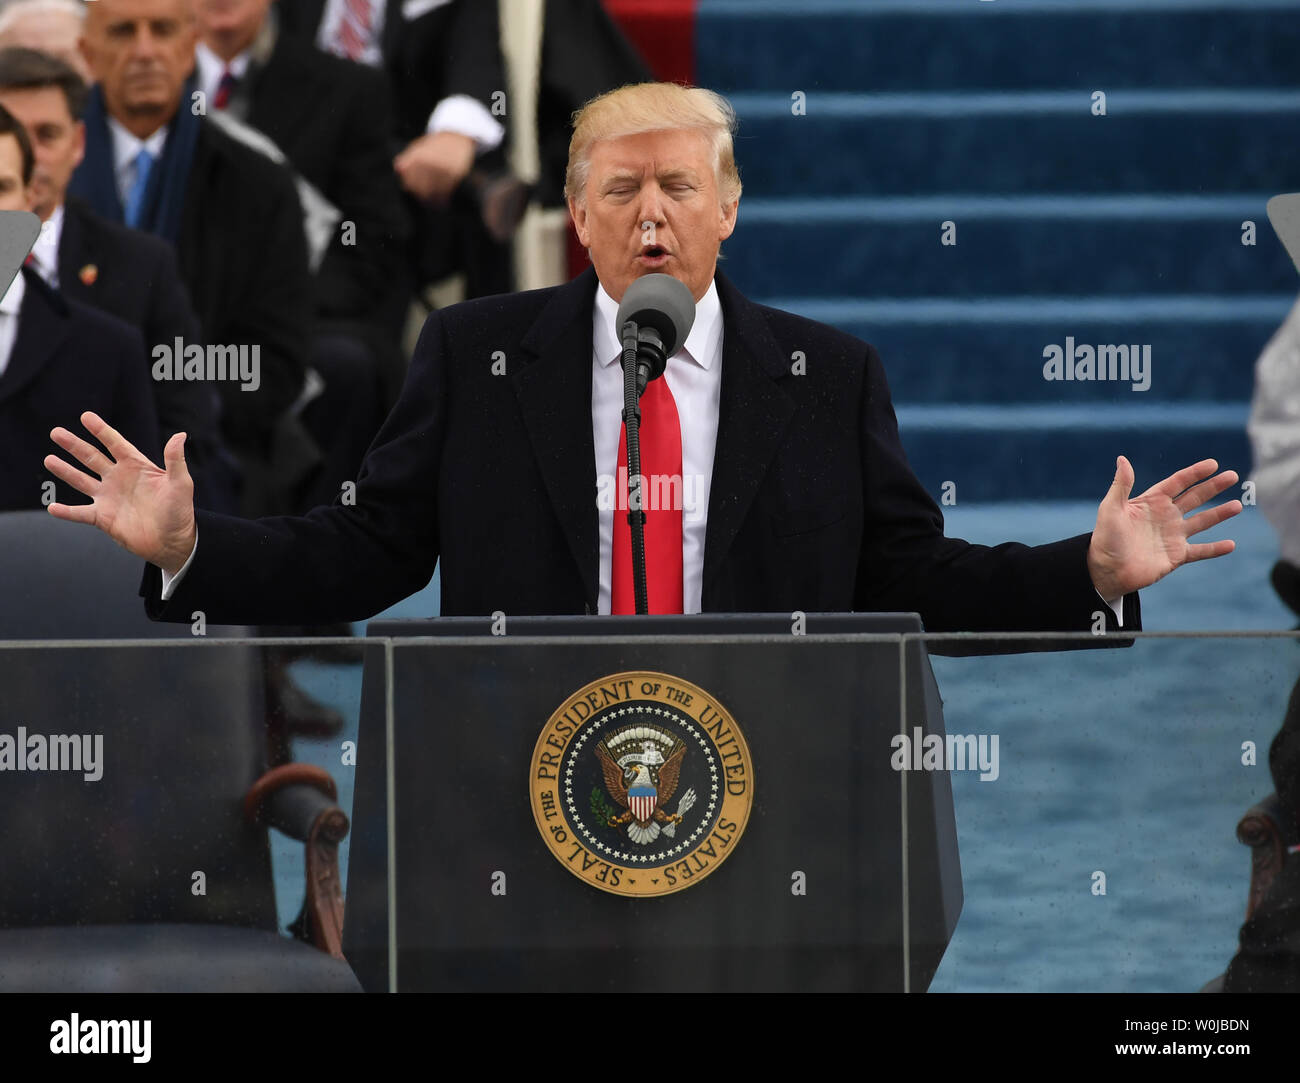 President Donald Trump delivers his inaugural address at the inauguration on January 20, 2017 in Washington, D.C.  Trump became the 45th President of the United States.      Photo by Pat Benic/UPI Stock Photo